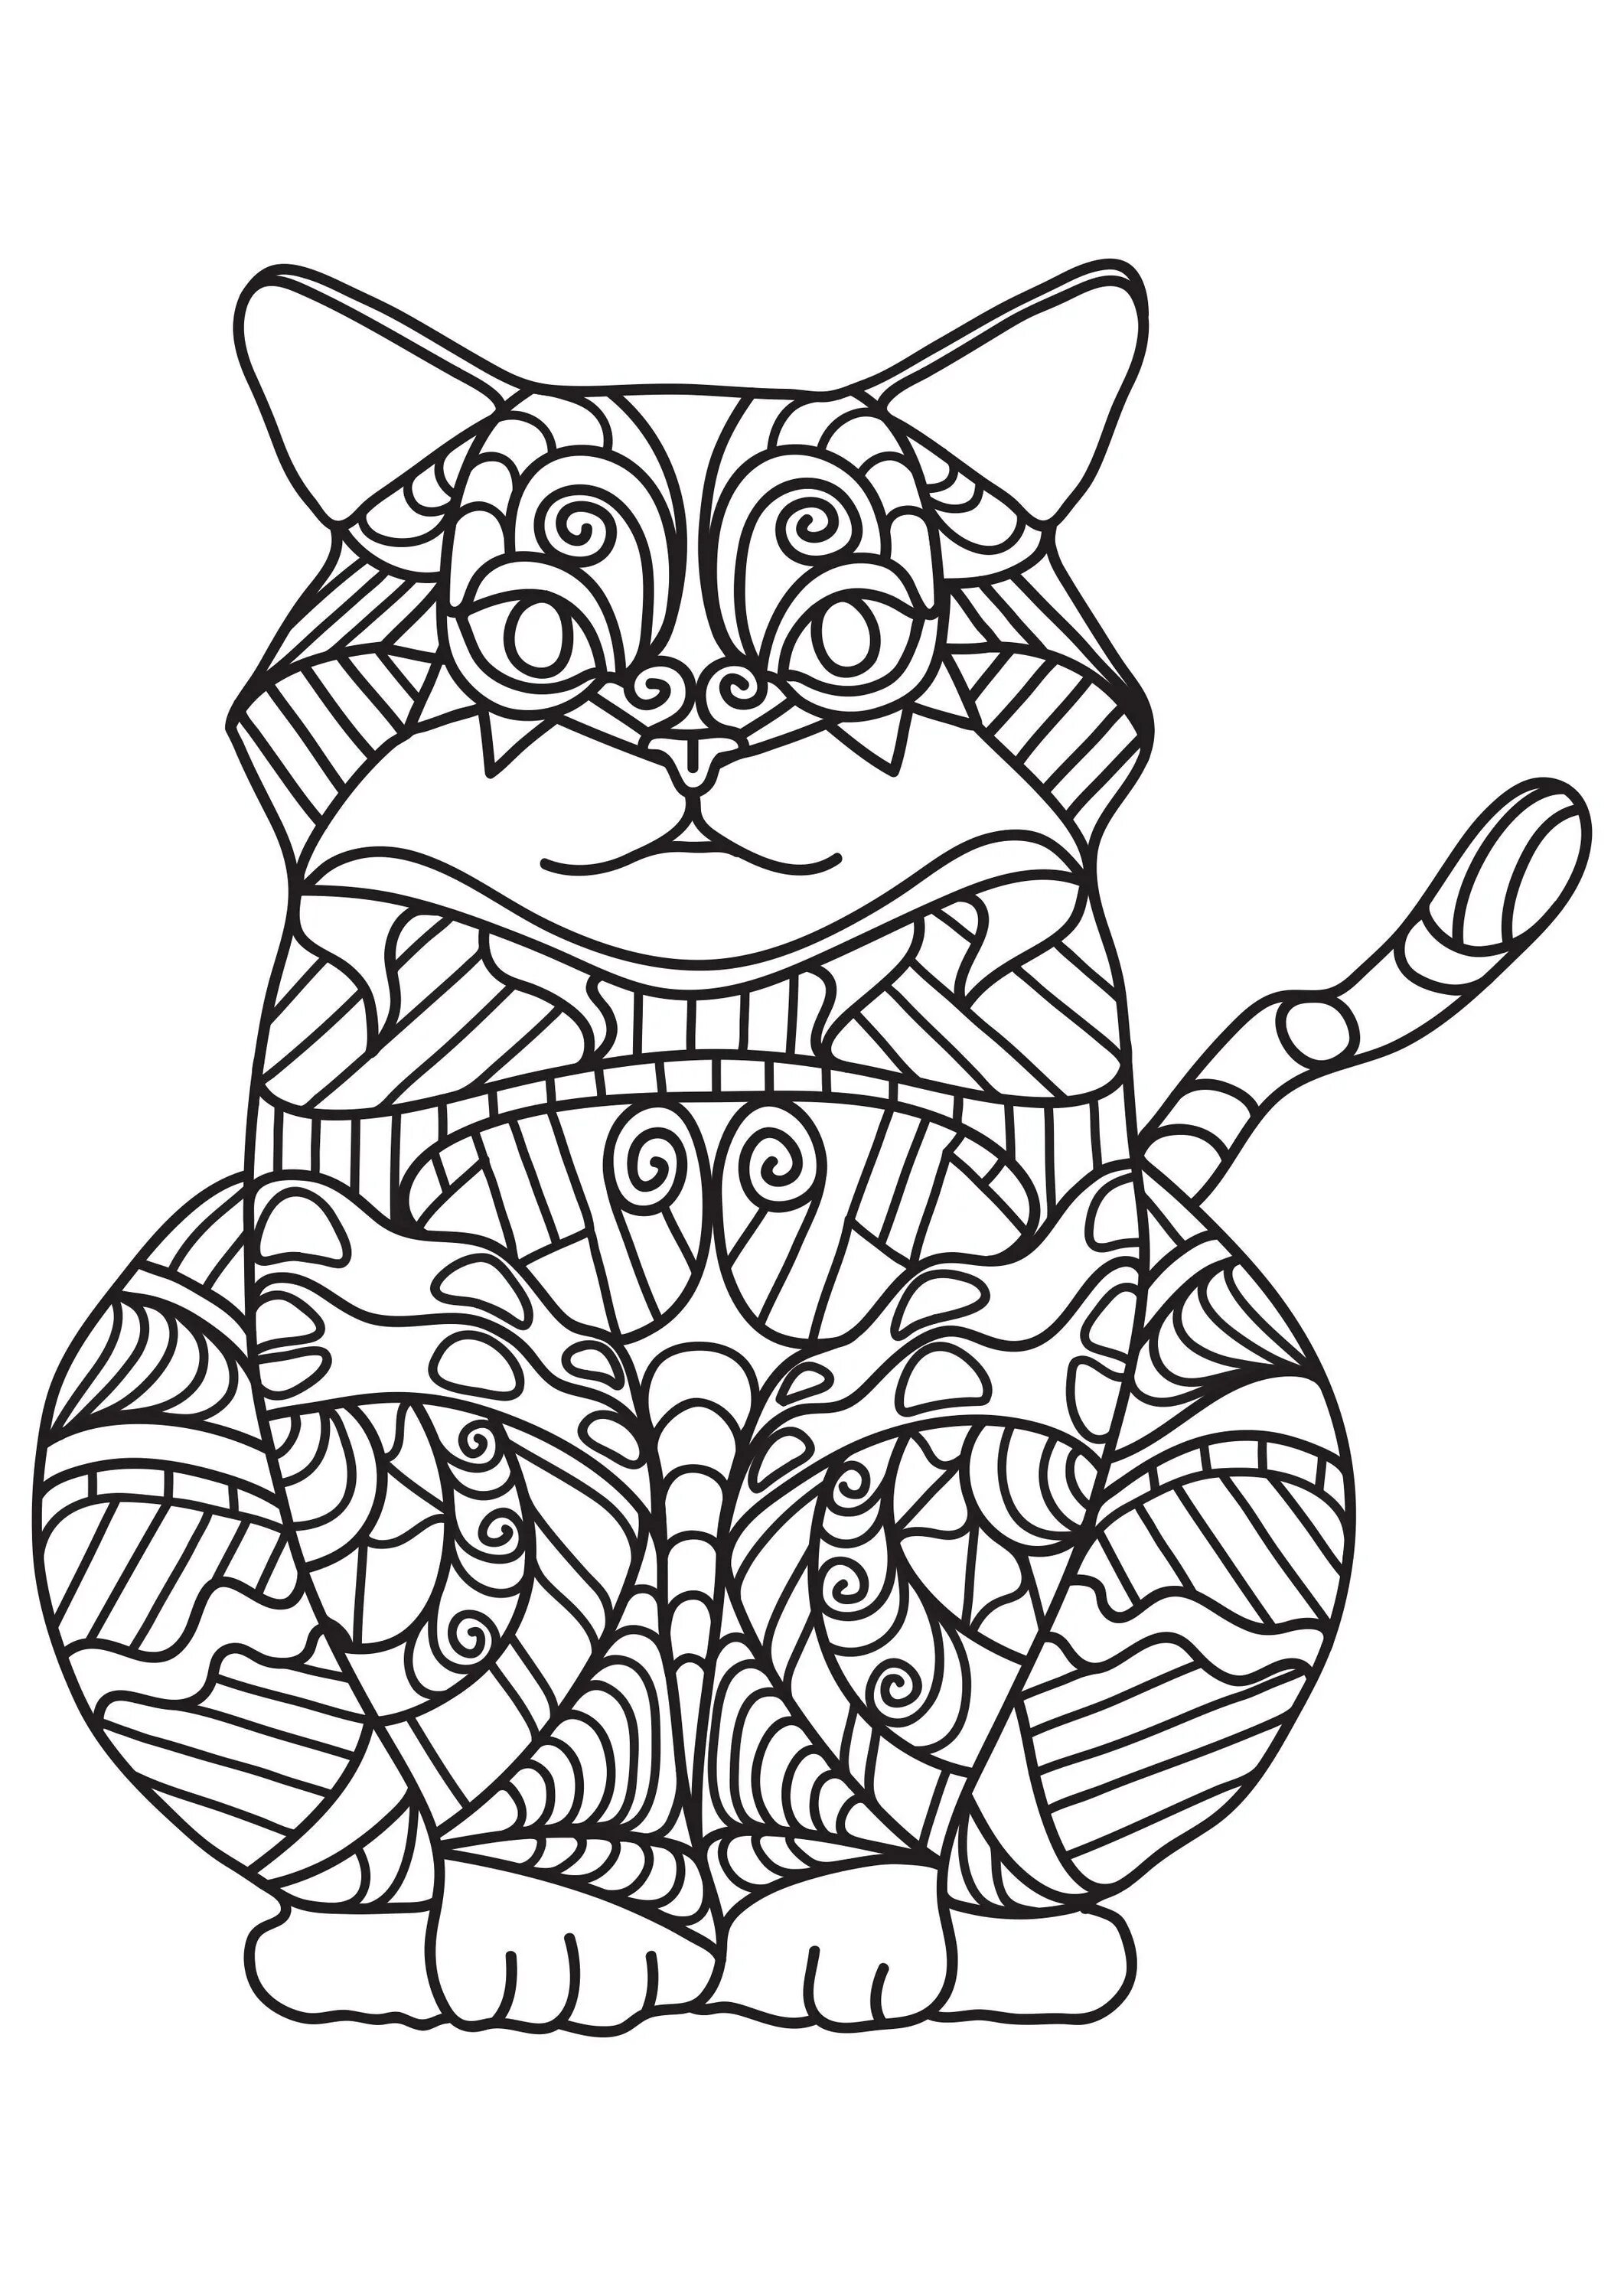 Fun coloring cat with a pattern